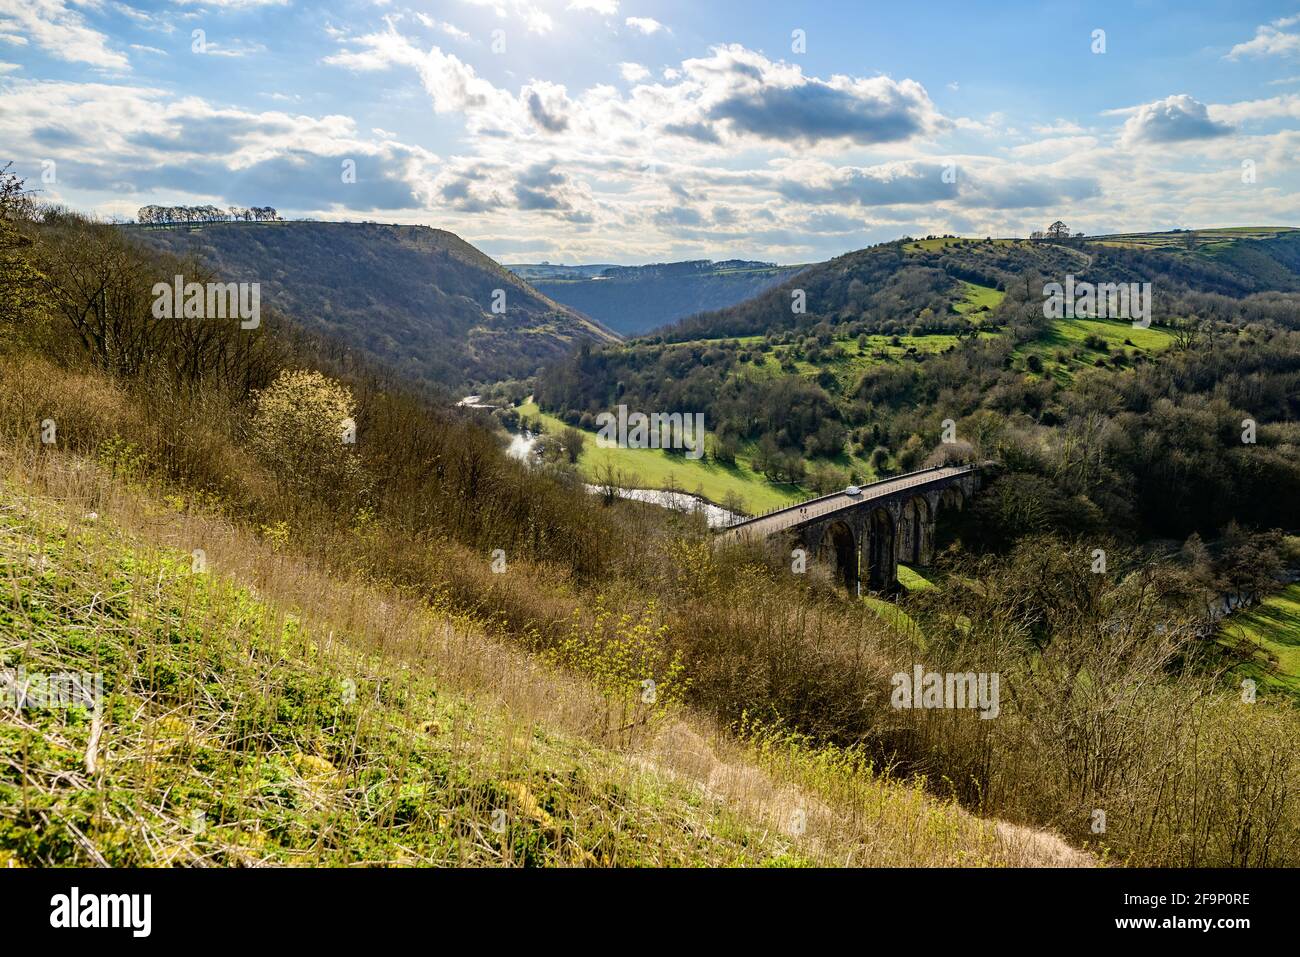 Monsal Head, Peak District, Derbyshire, UK. The Monsal Trail passes over the disused railway viaduct in the Wye valley below. Stock Photo